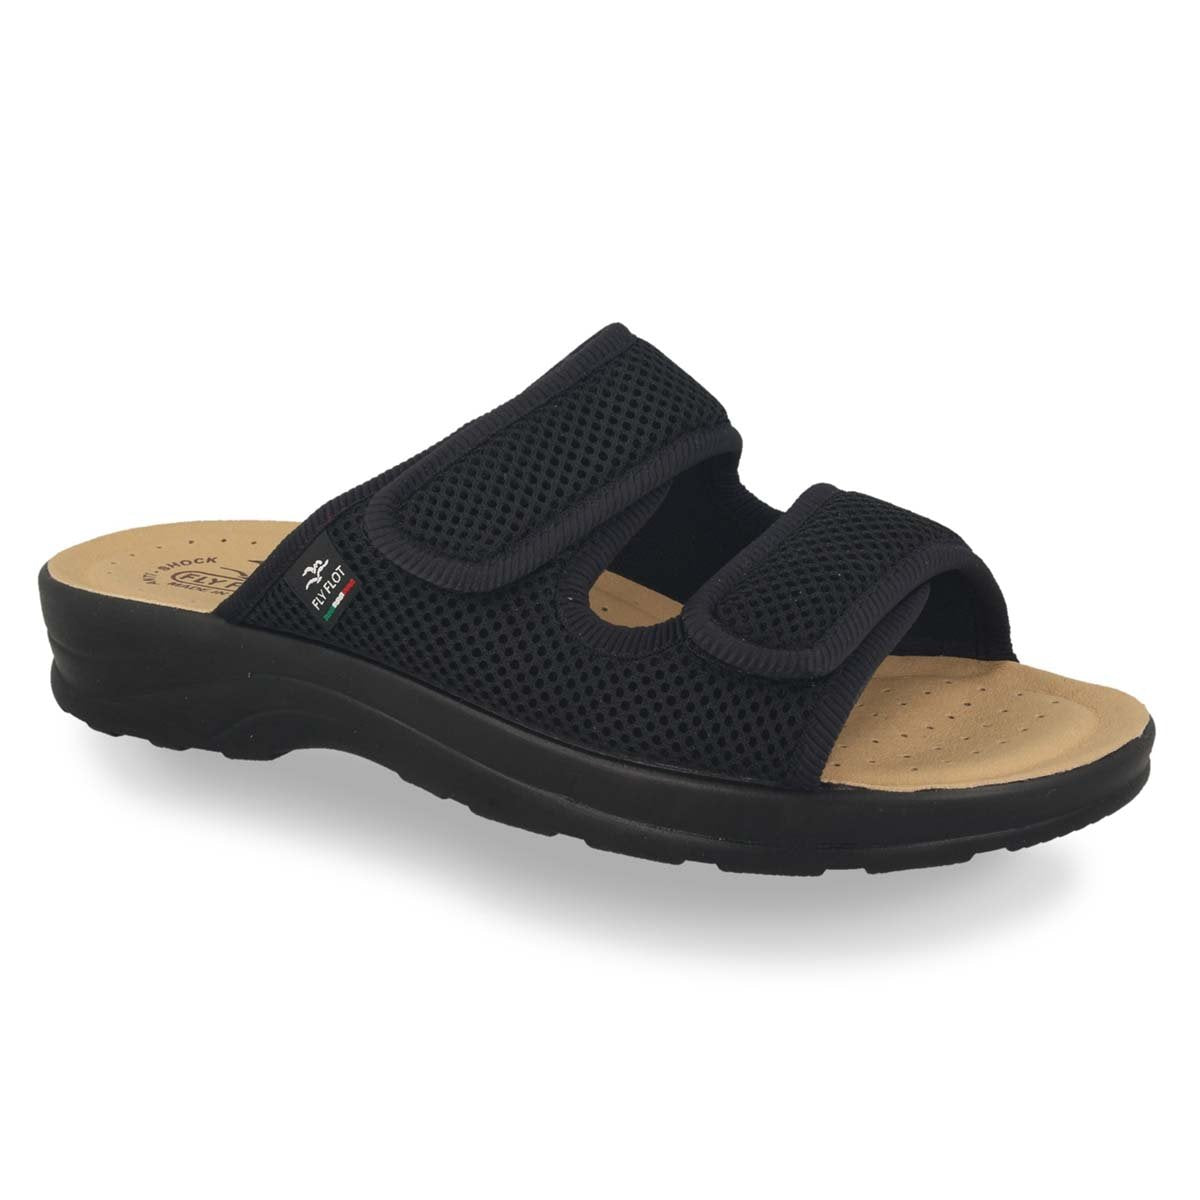 See the Velcro Double Strap Slide Men Sandals in the colour ANTHRACITE, available in various sizes